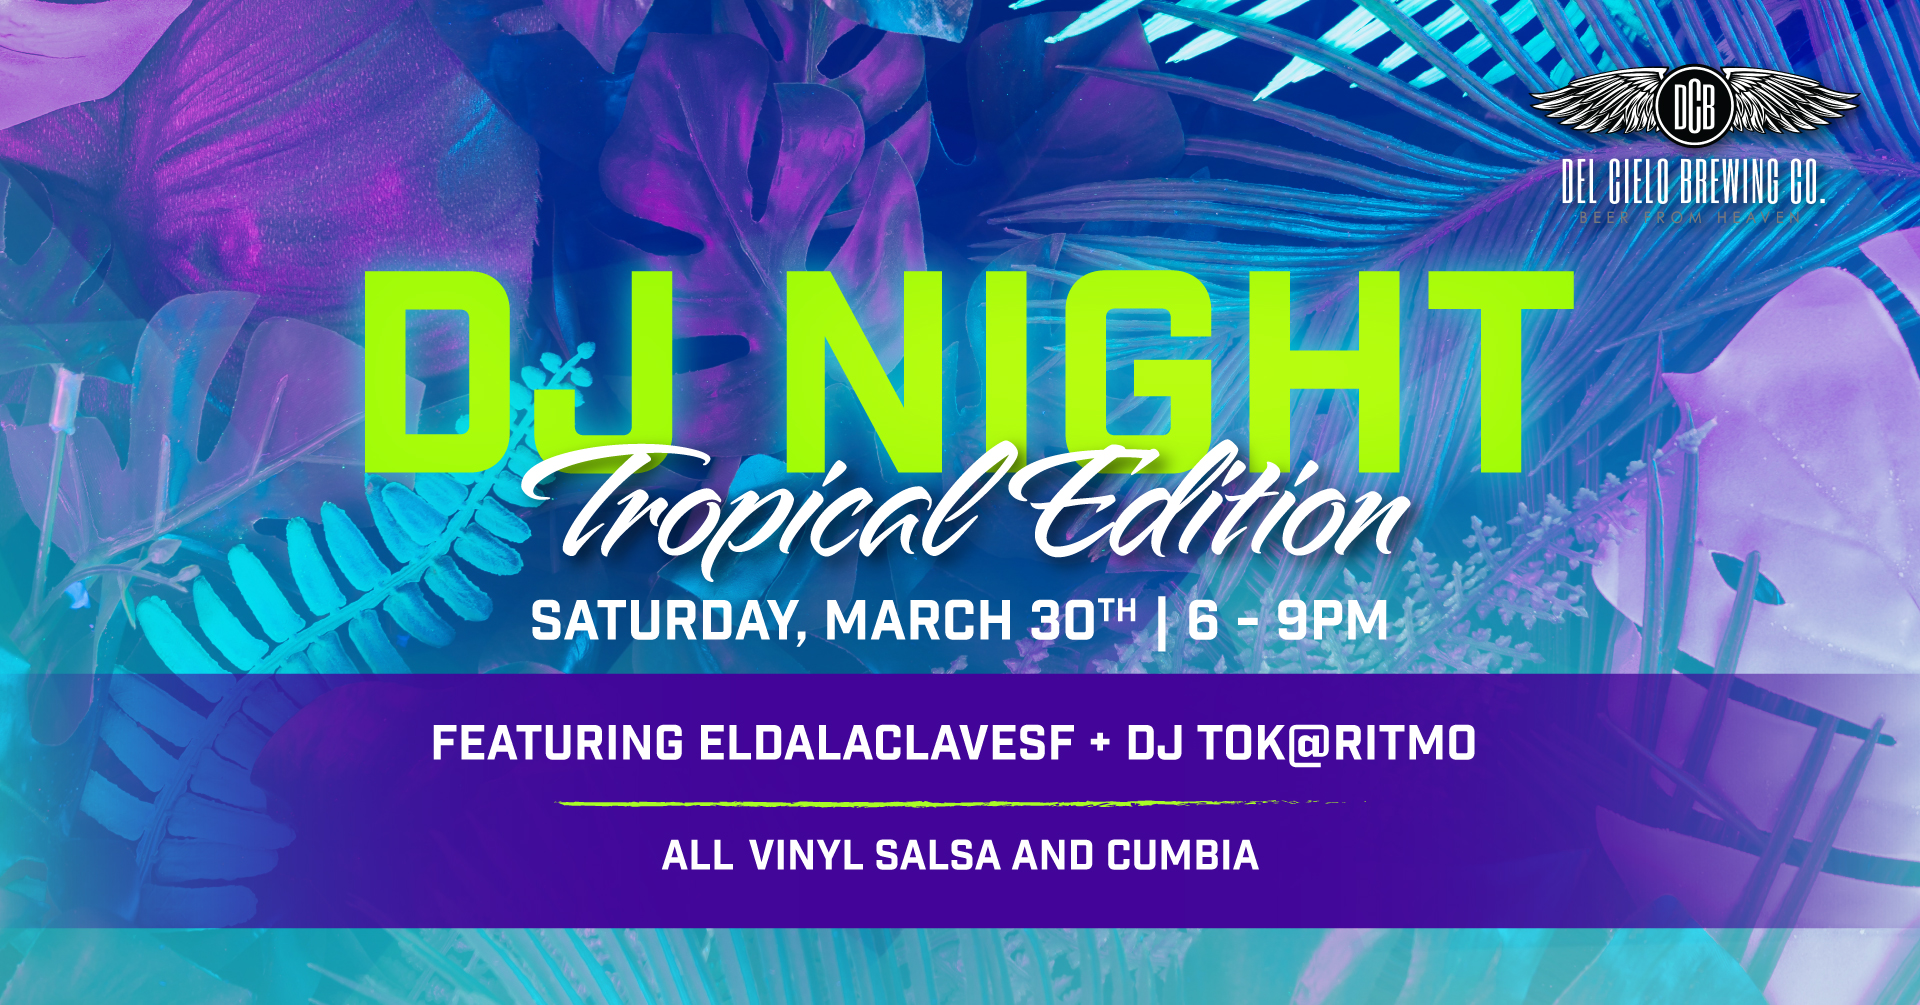 topical edition dj night with salsa and cumbia music - march 30th